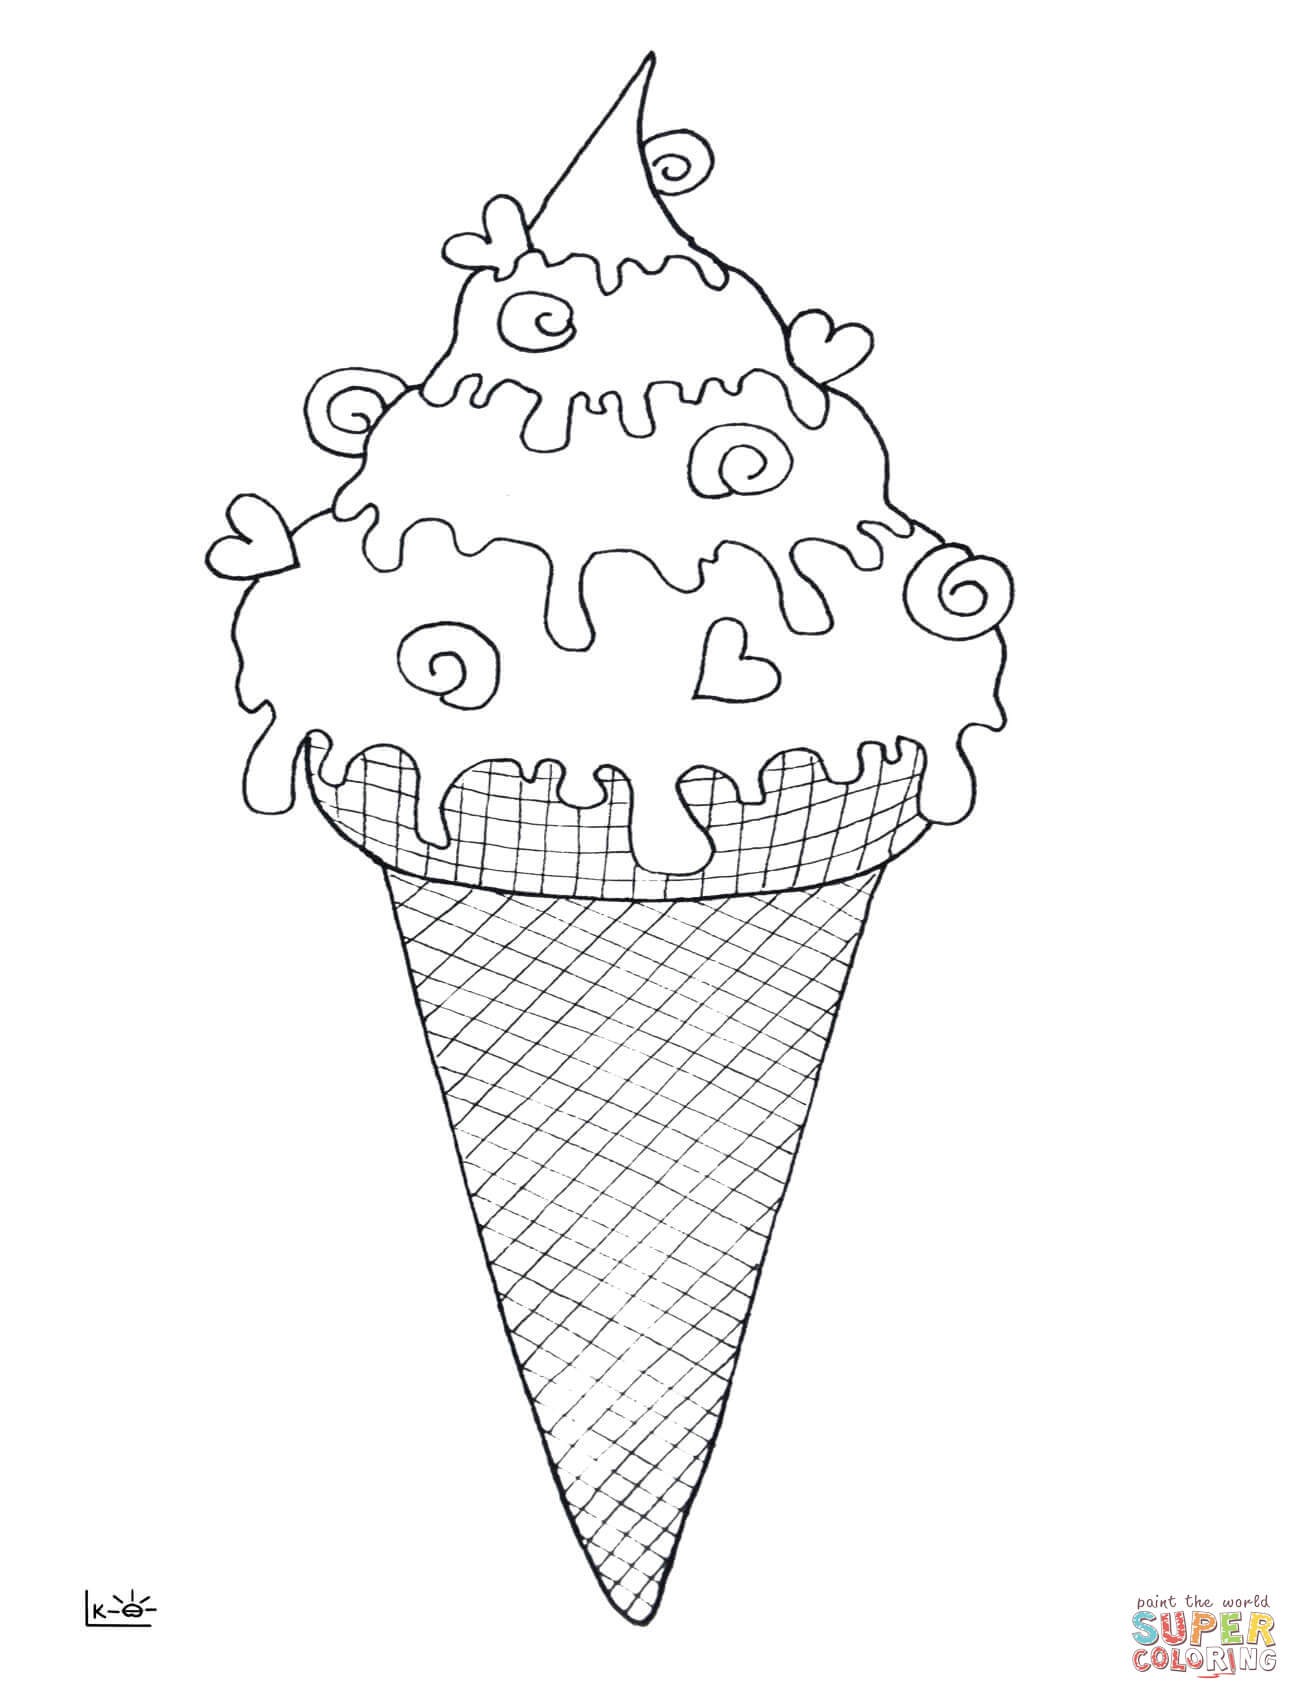 Ice Cream Cone Coloring Page at Free printable